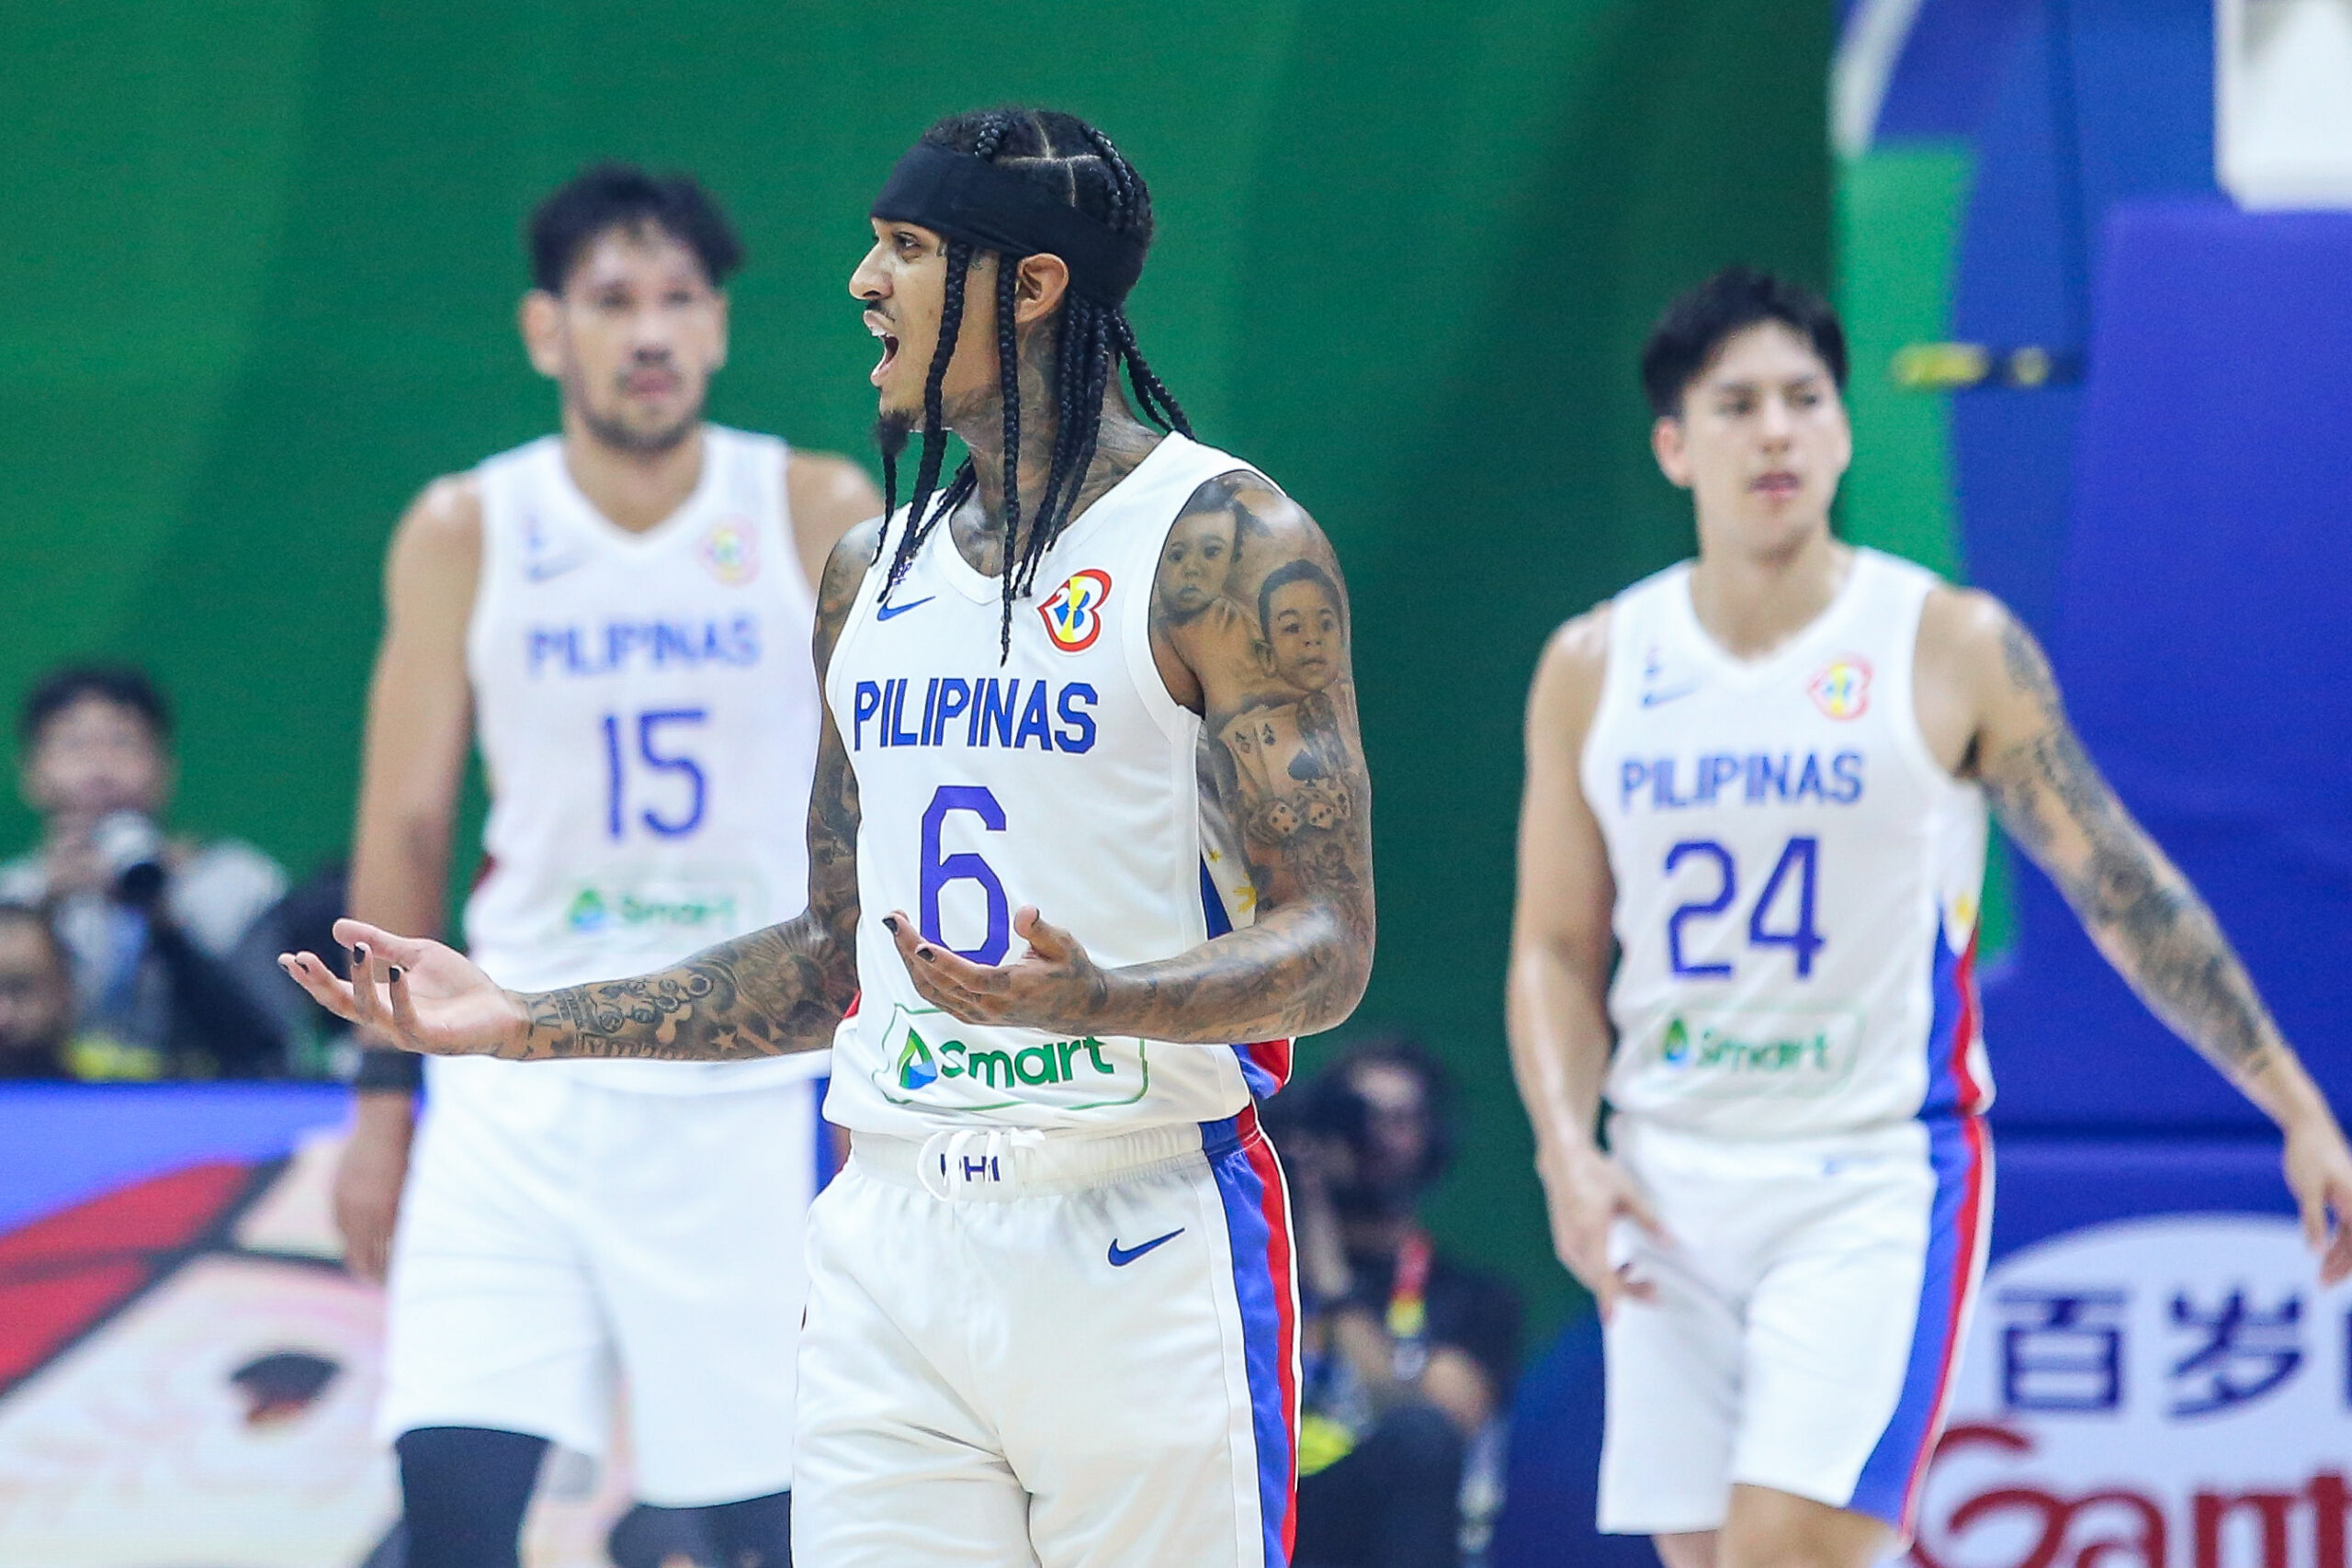 Jordan Clarkson leads the Philippines to a win in the Fiba World Cup.